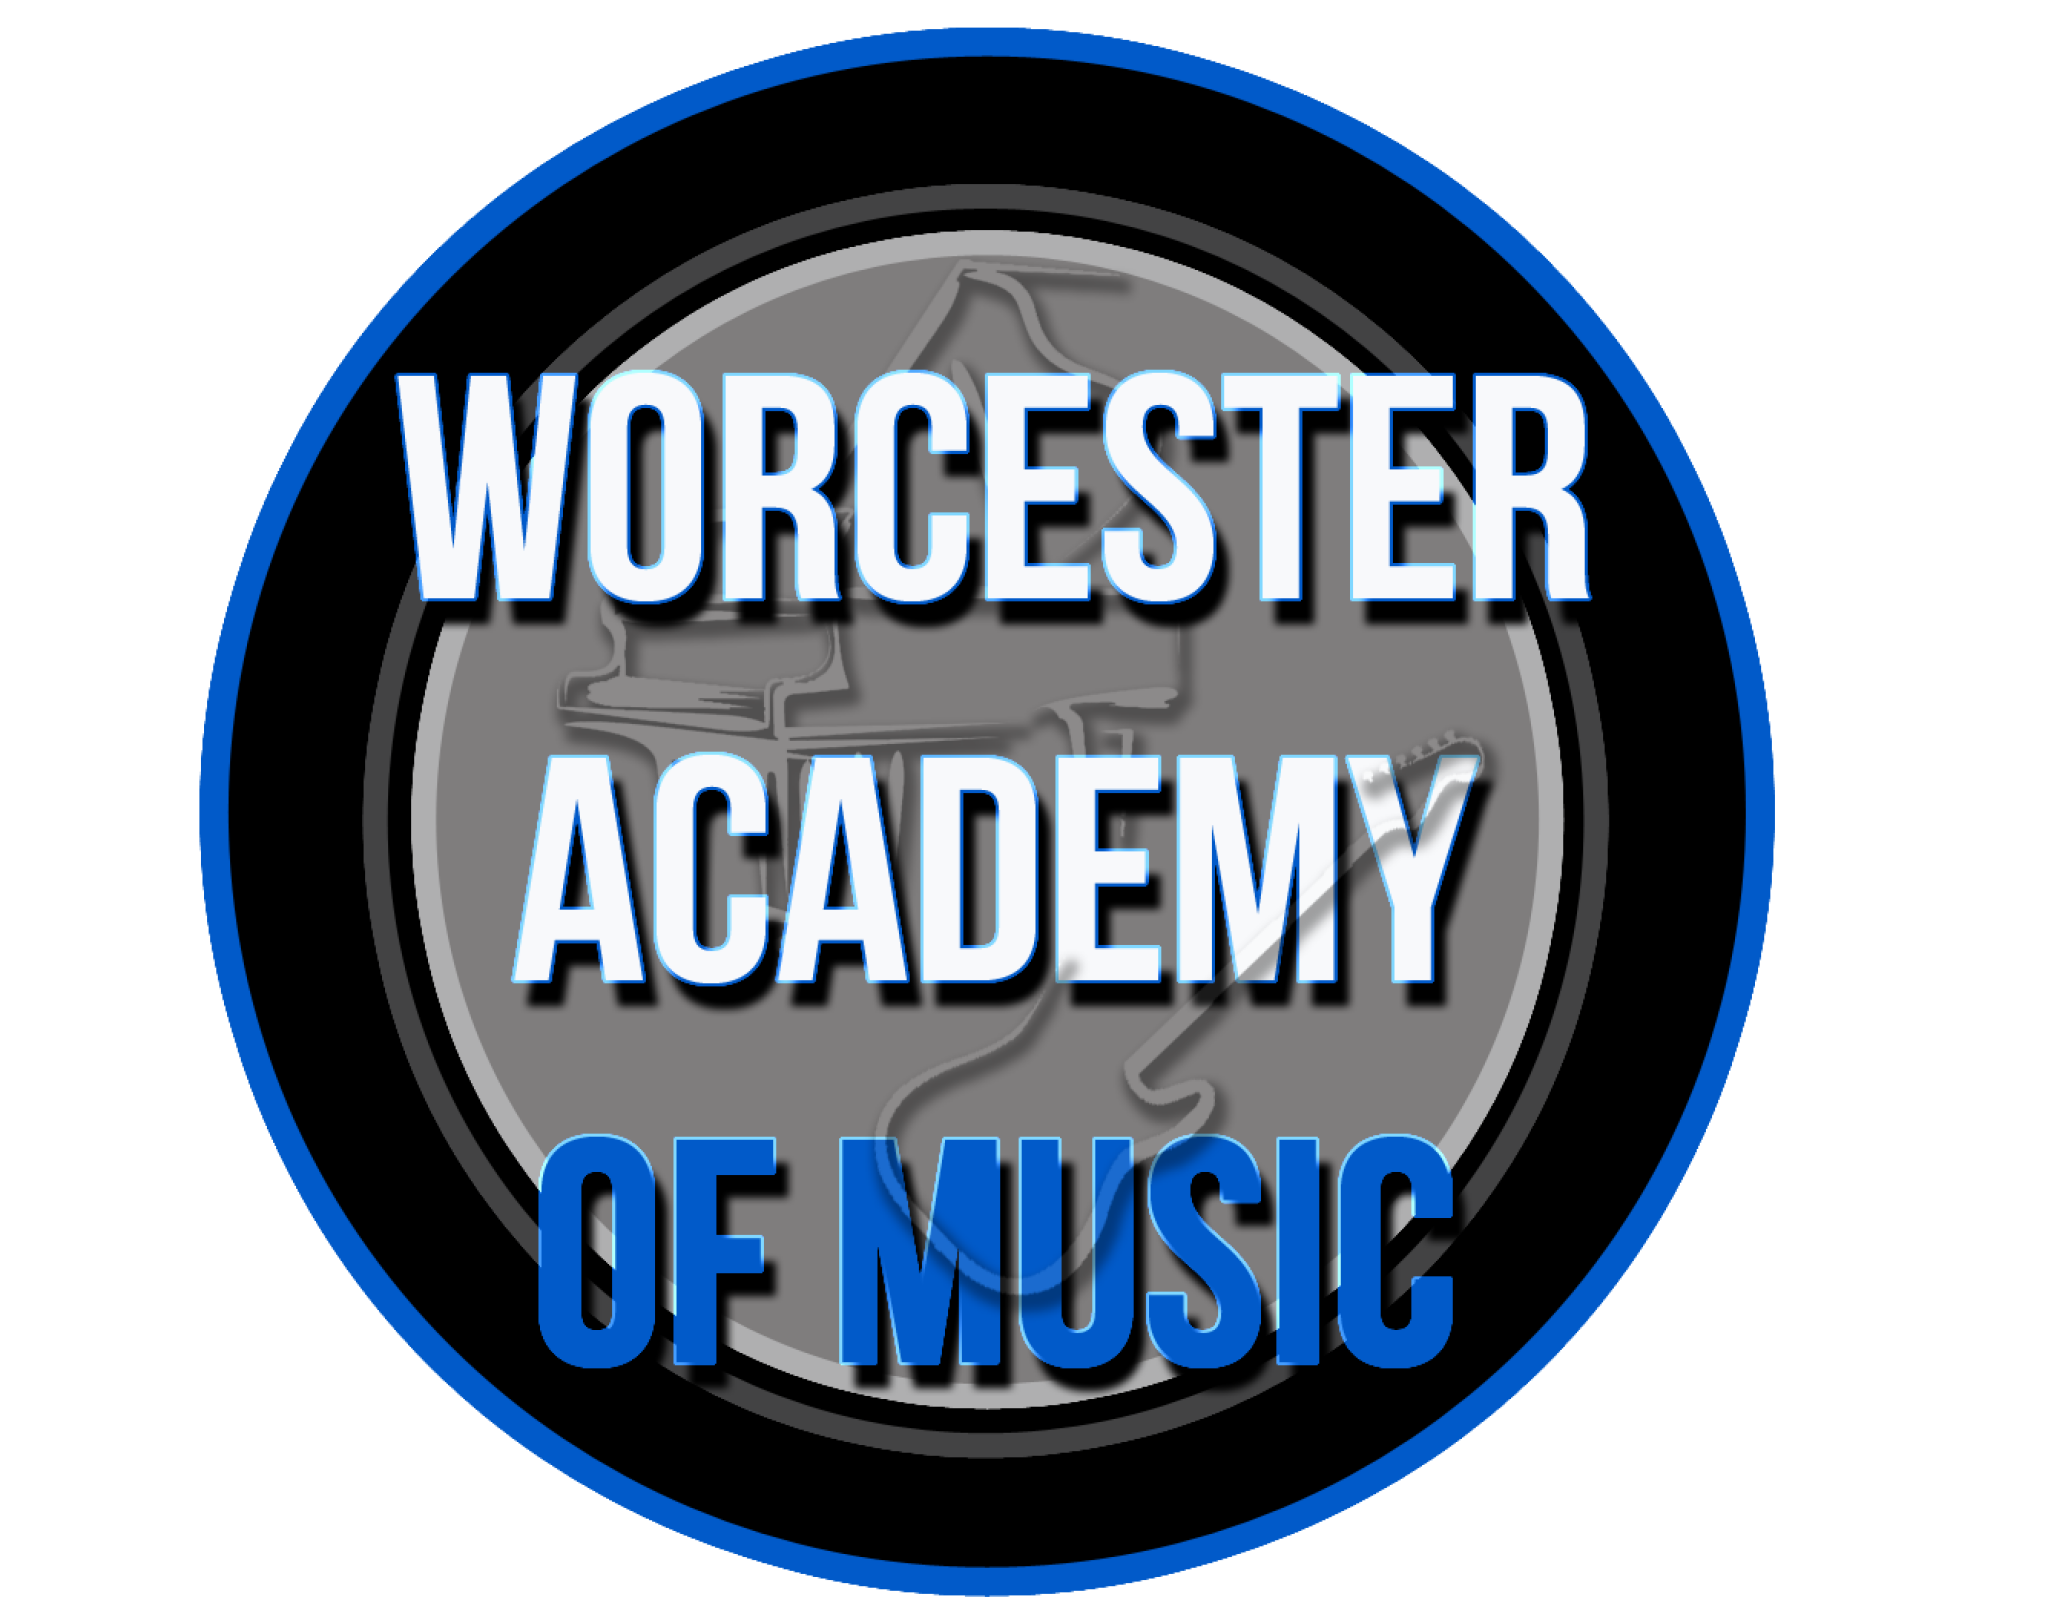 Worecster Academy of Music 3.png